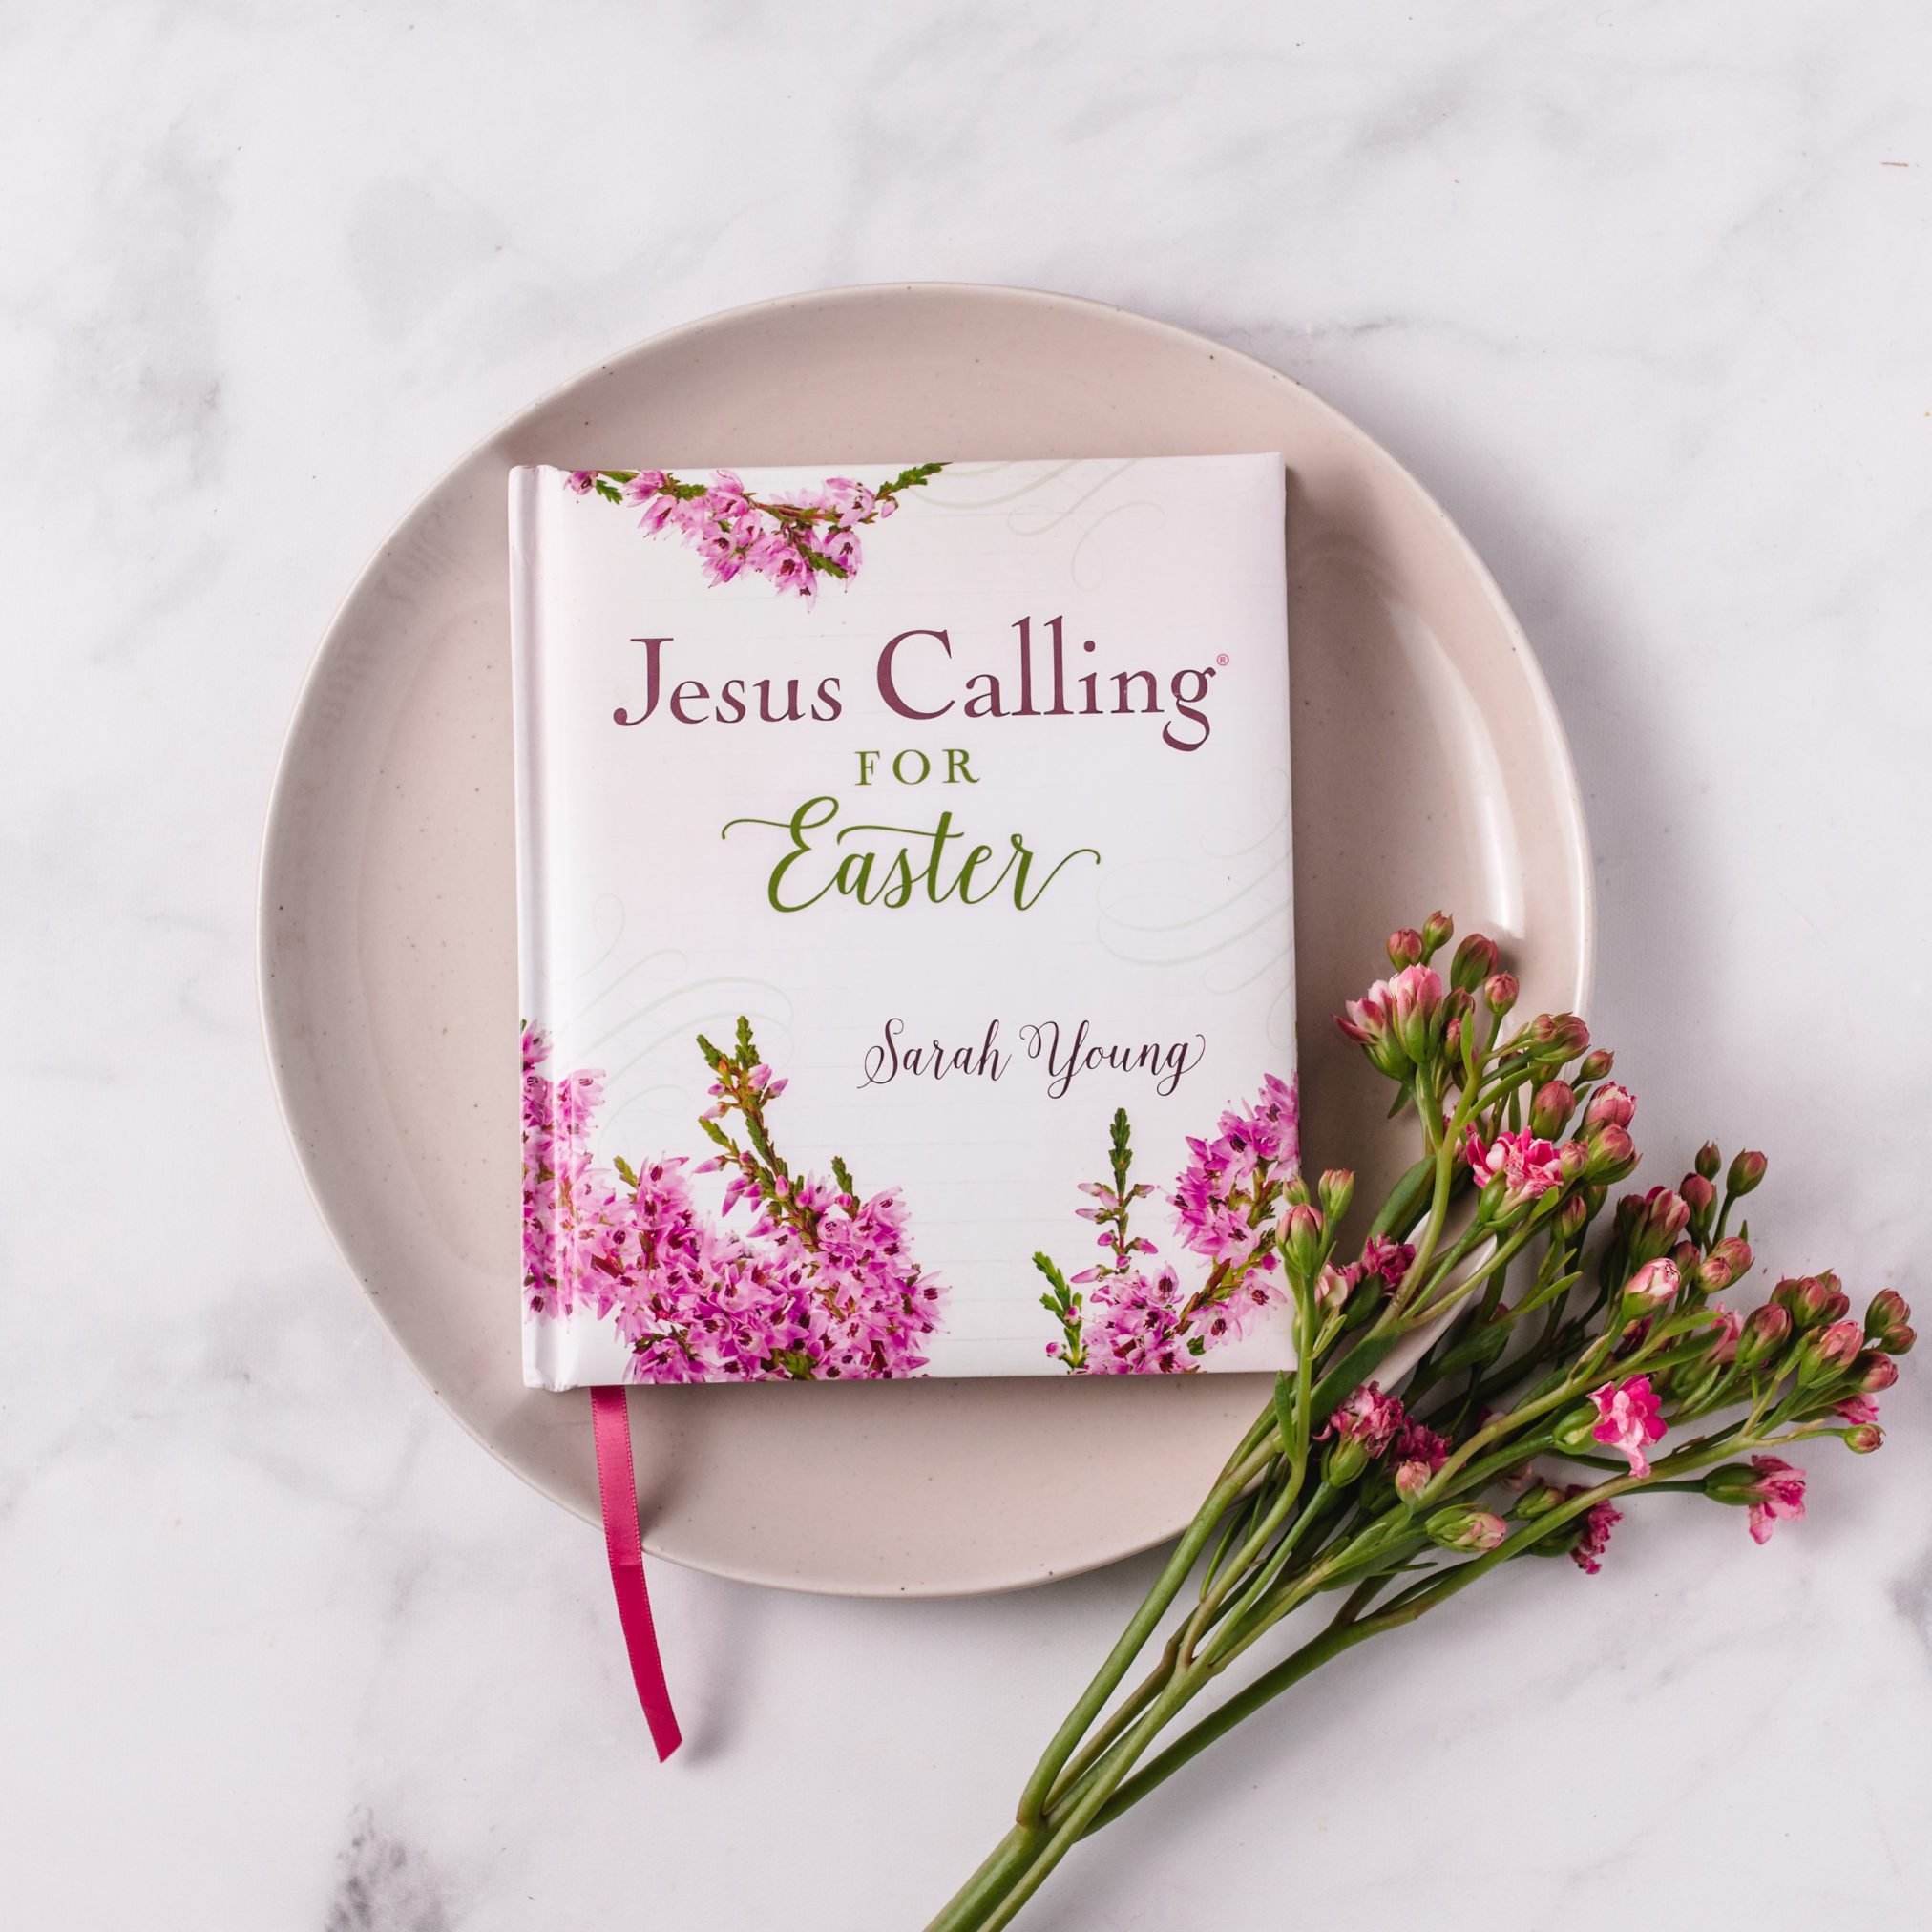 2 #Winners- Easter Books Prize Pack (Jesus Calling - Story of Easter) Open to US, Ends 3/31